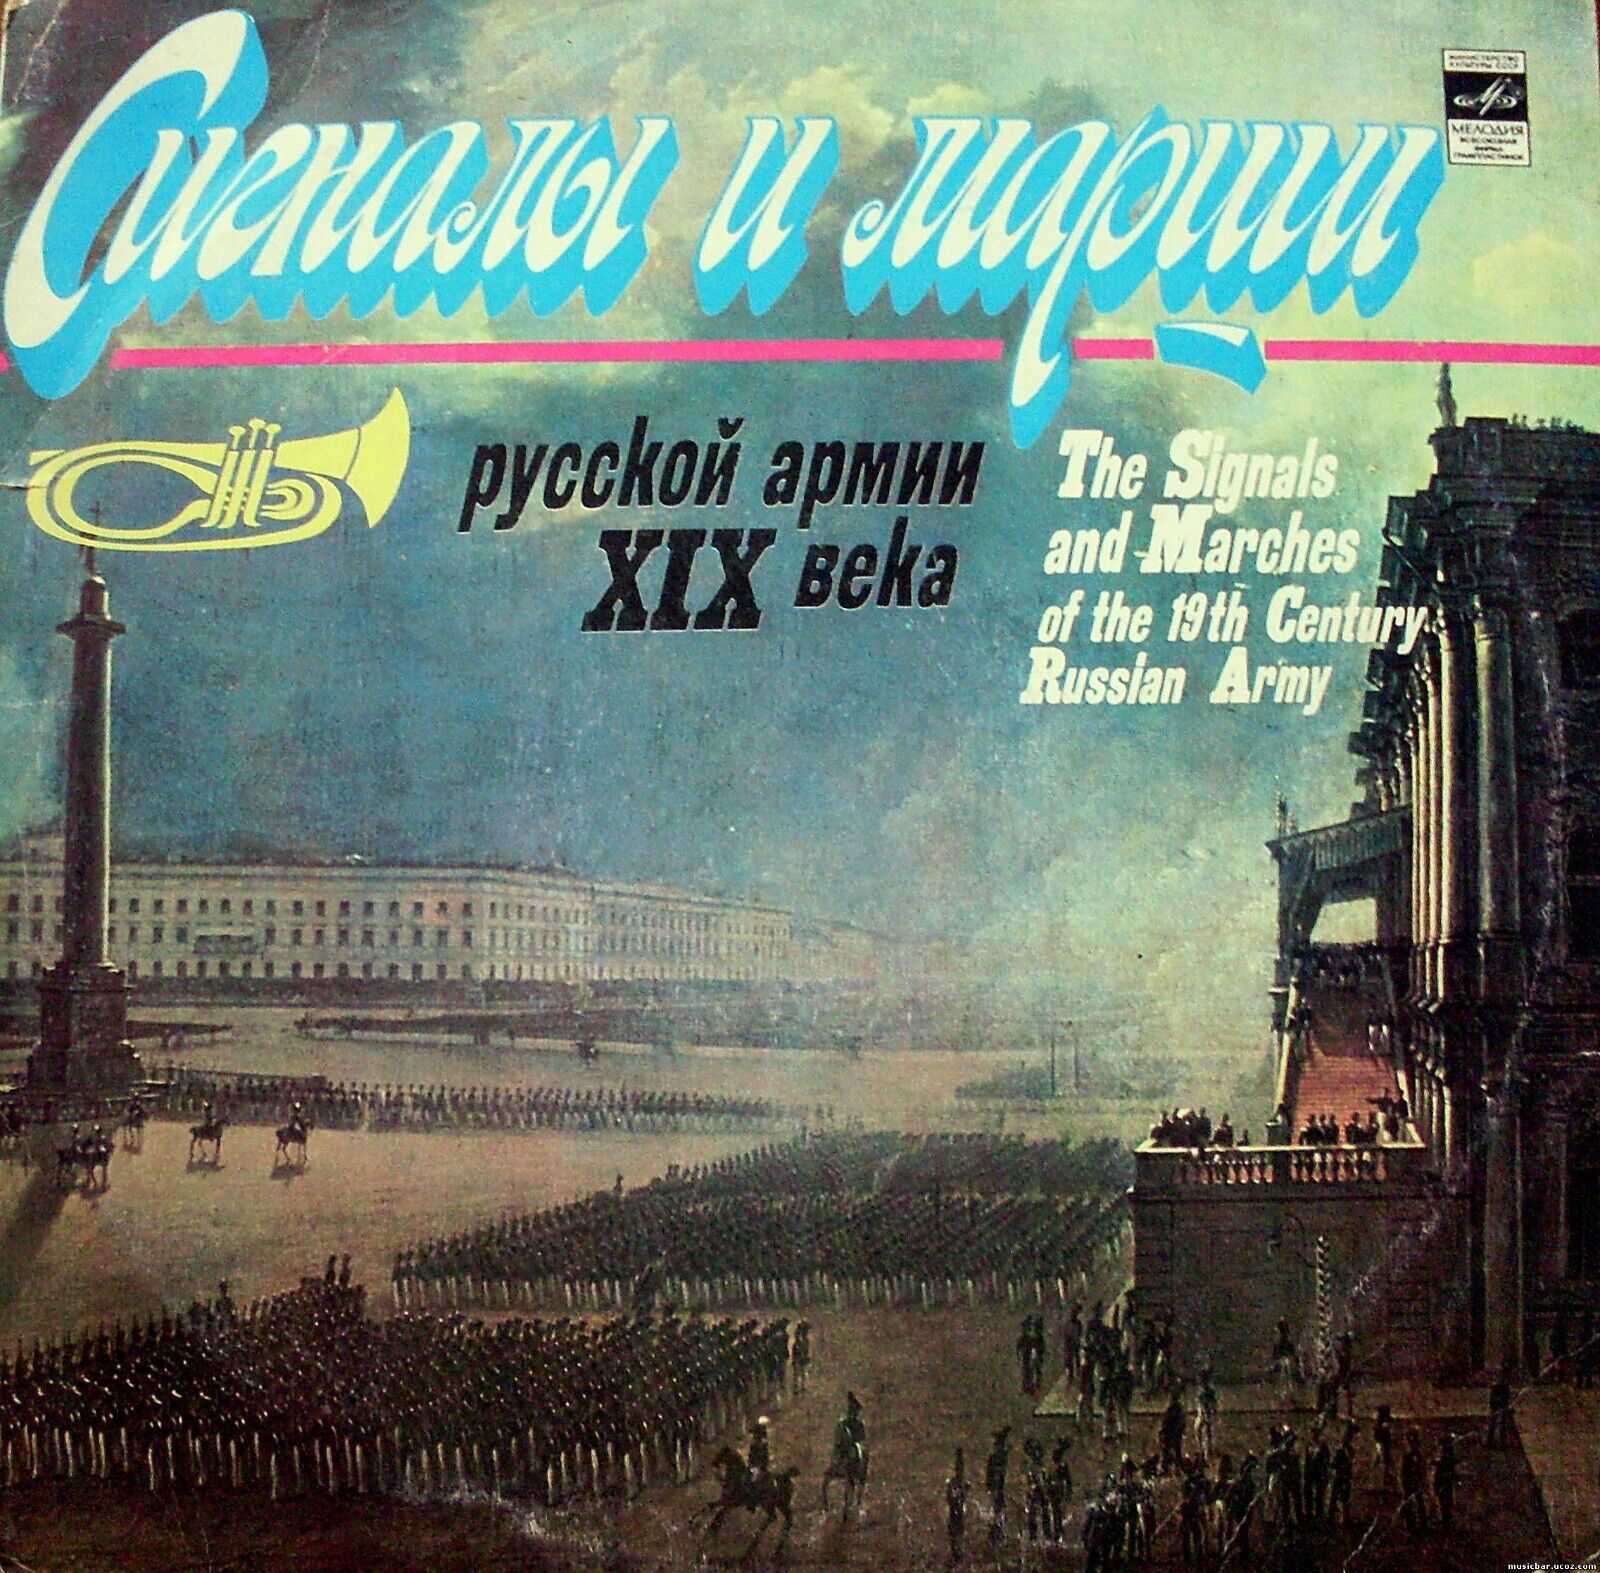 Signals and marches of the 19th century Russian army vinyl lp